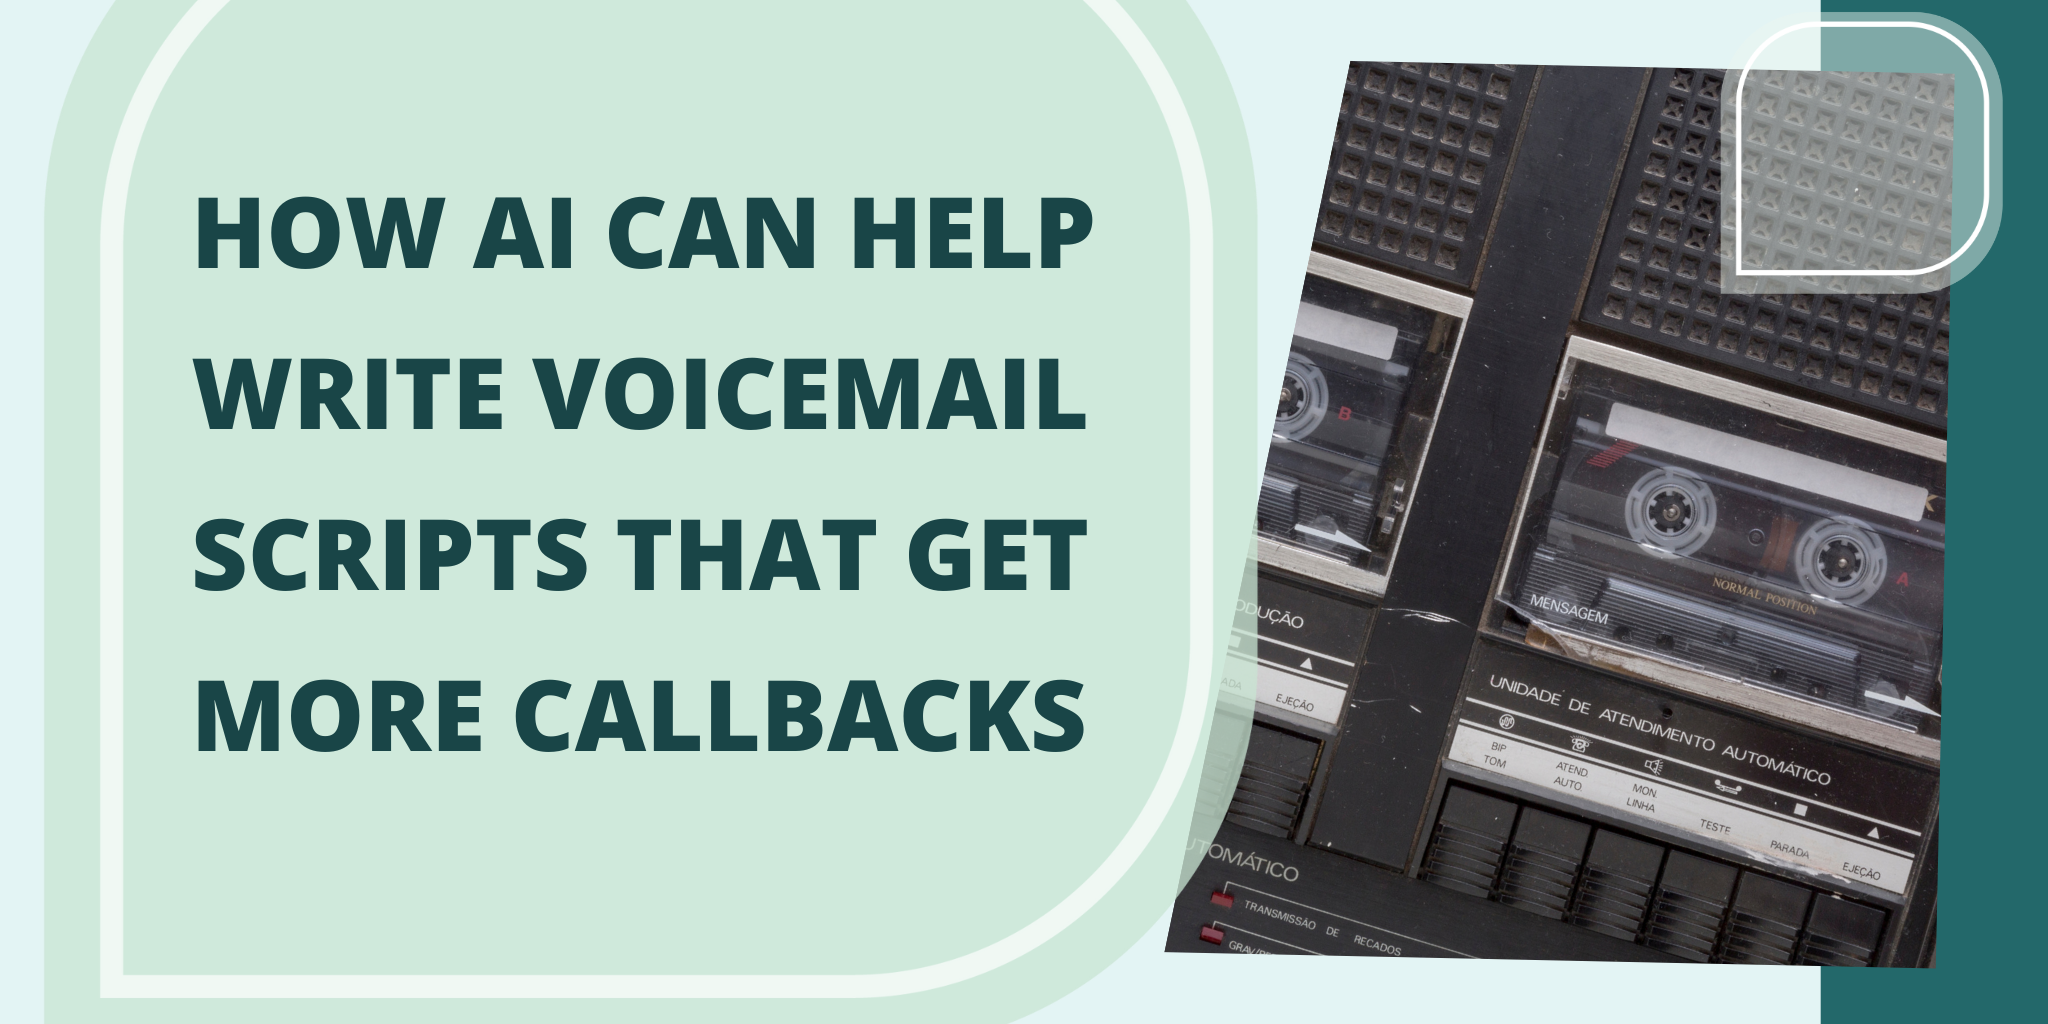 How to Use AI to Leave Better Voicemails and Increase Callbacks